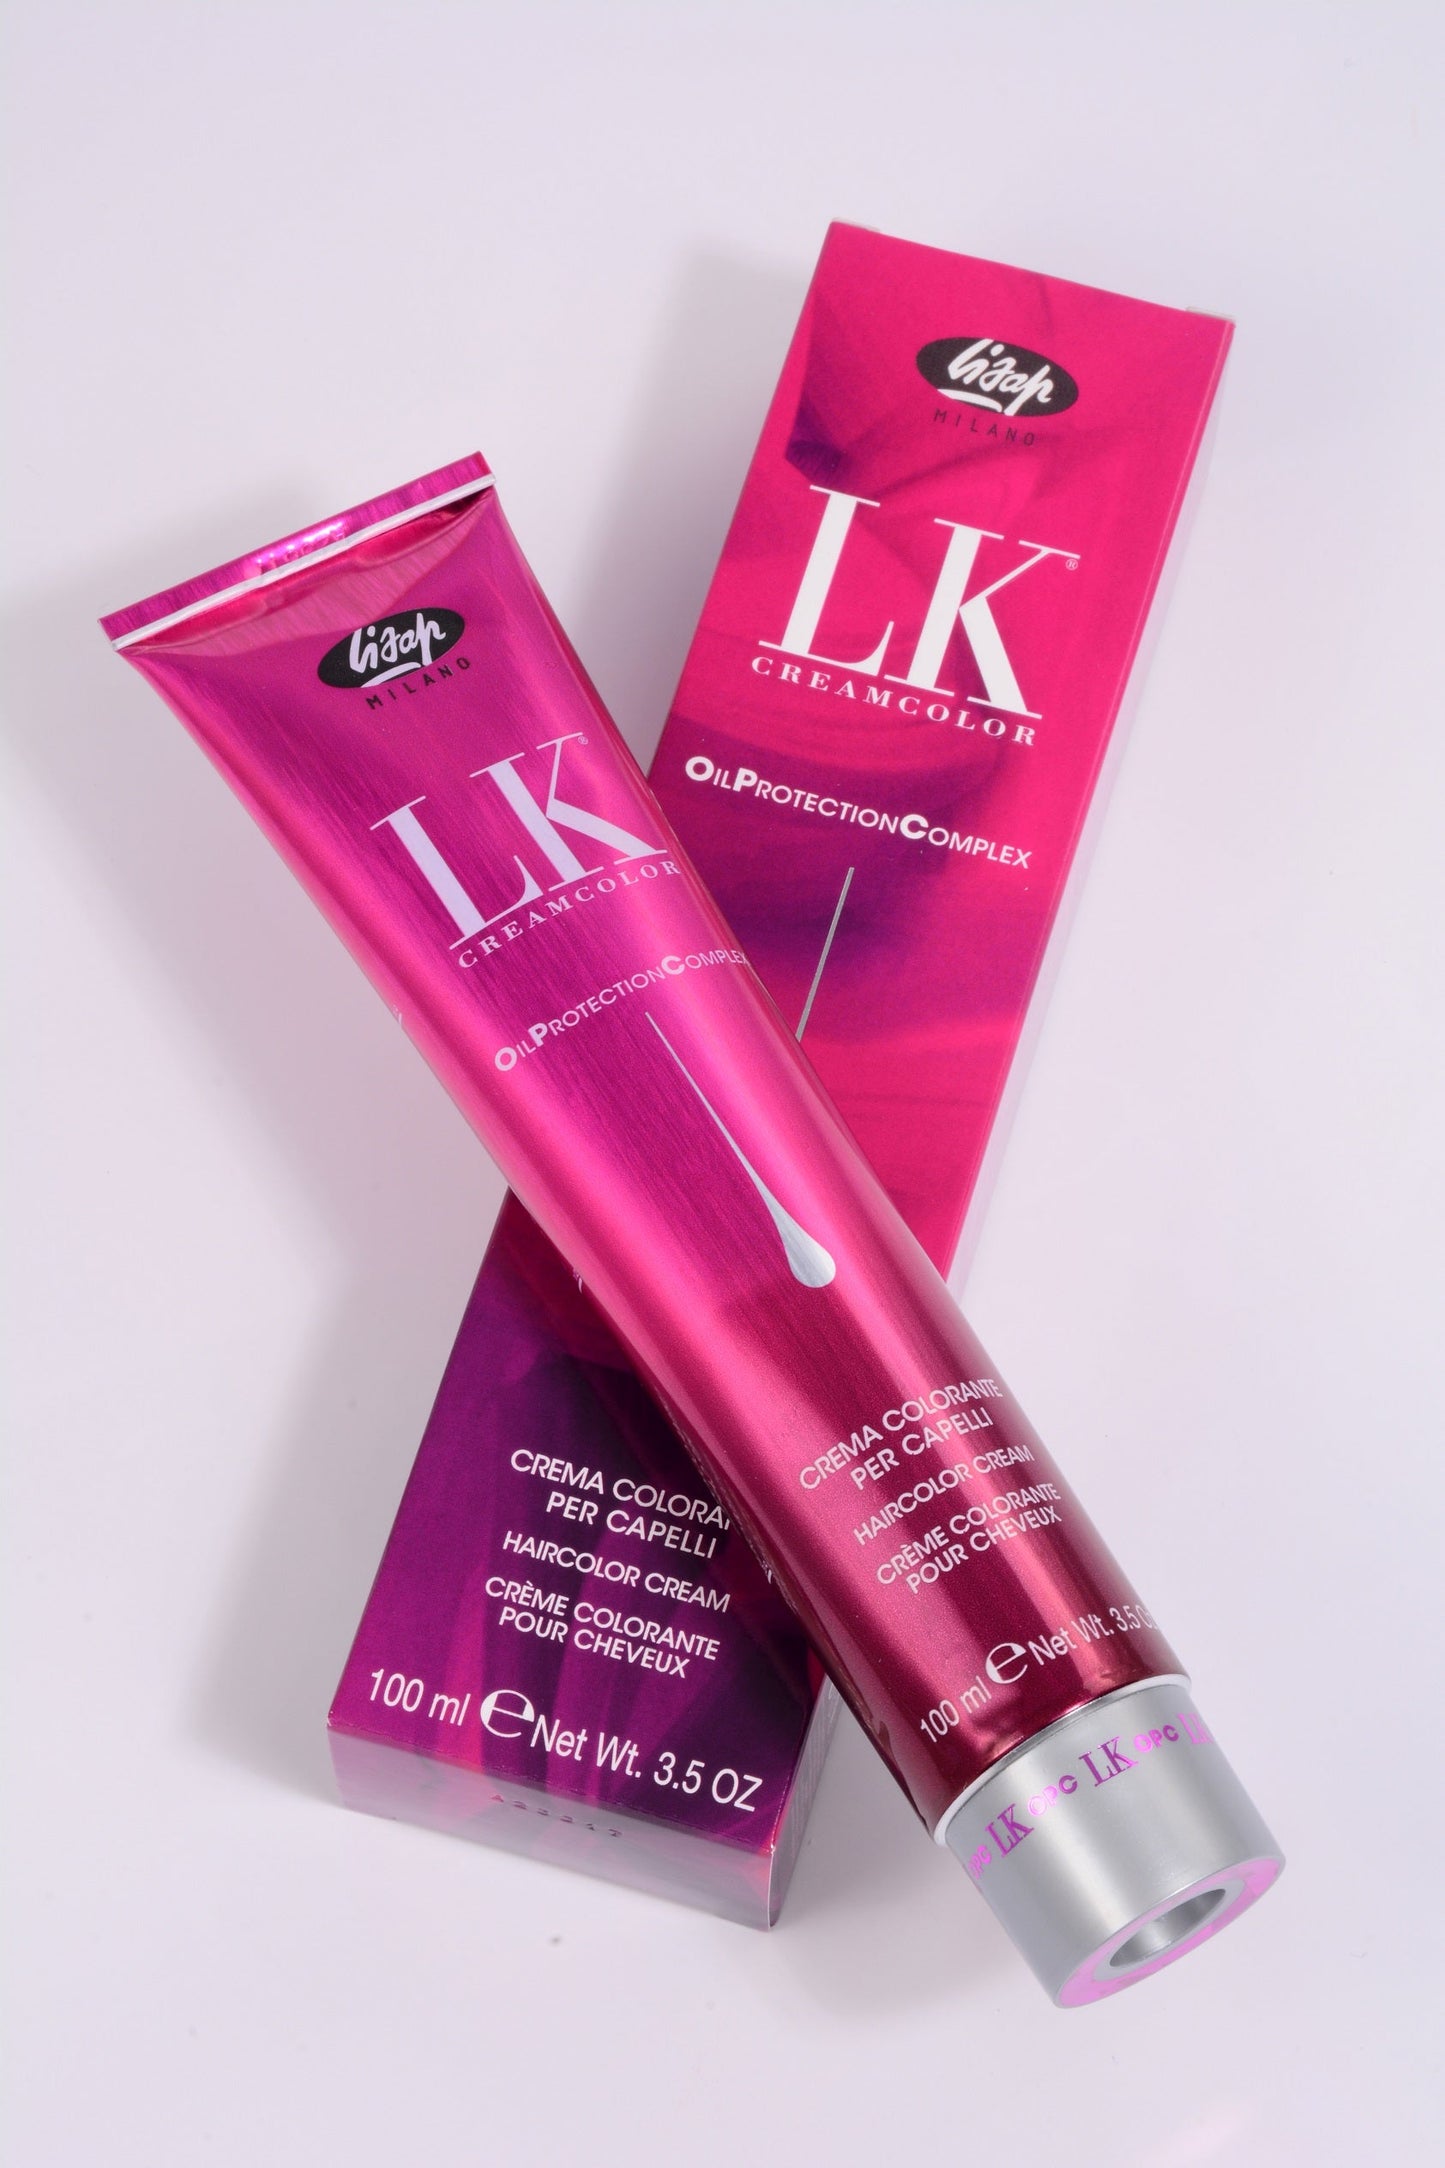 LK Creamcolor 9/08 Oil Protection Complex